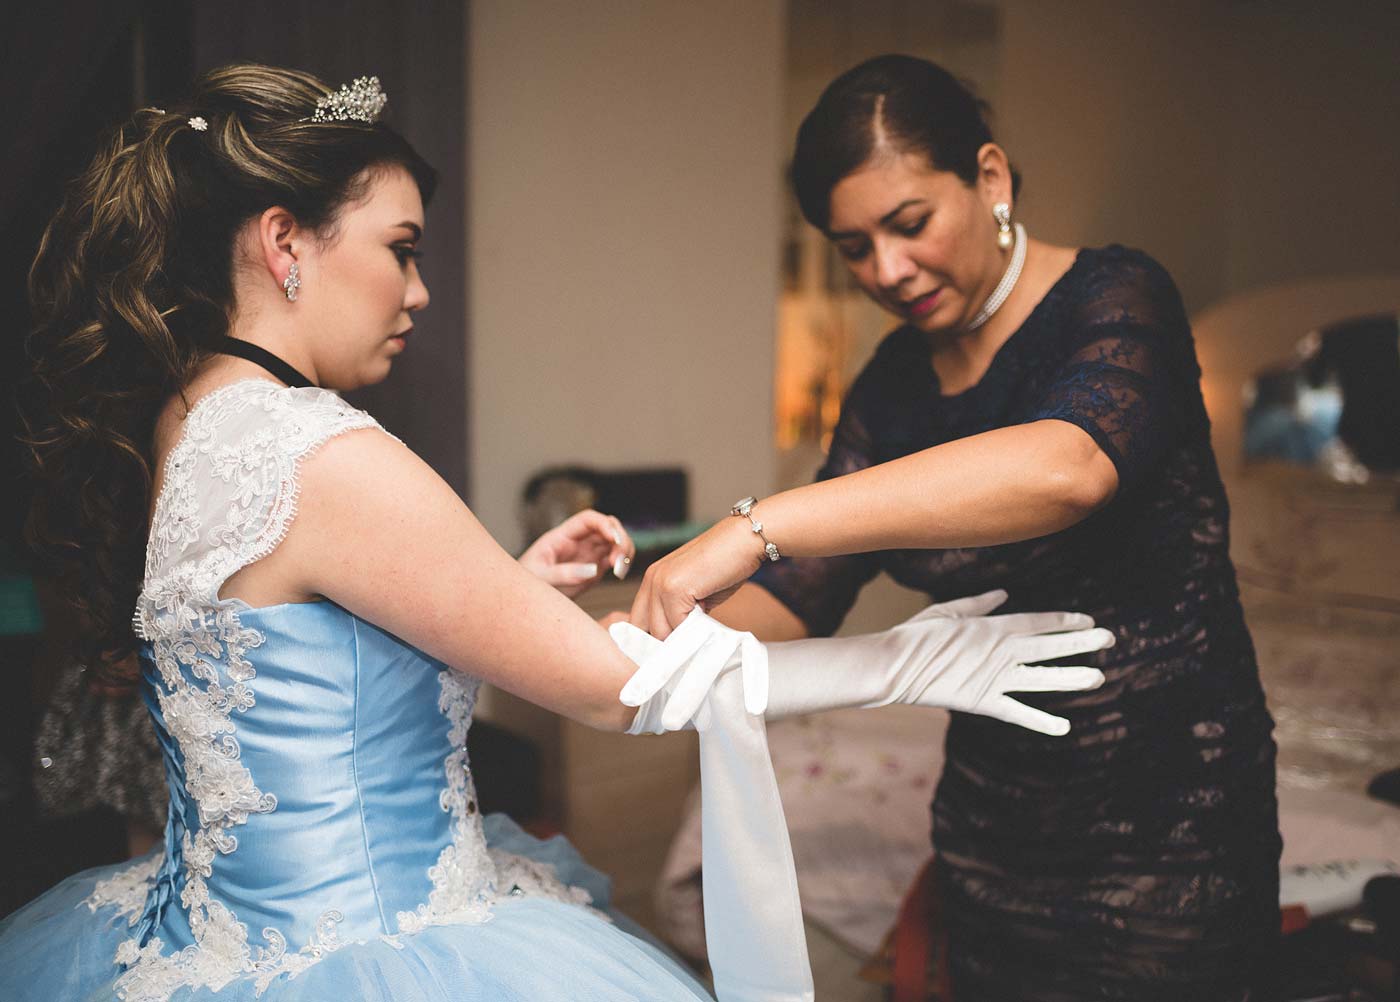 s02-Getting-Ready---Corinne's-Quince!-33.jpg